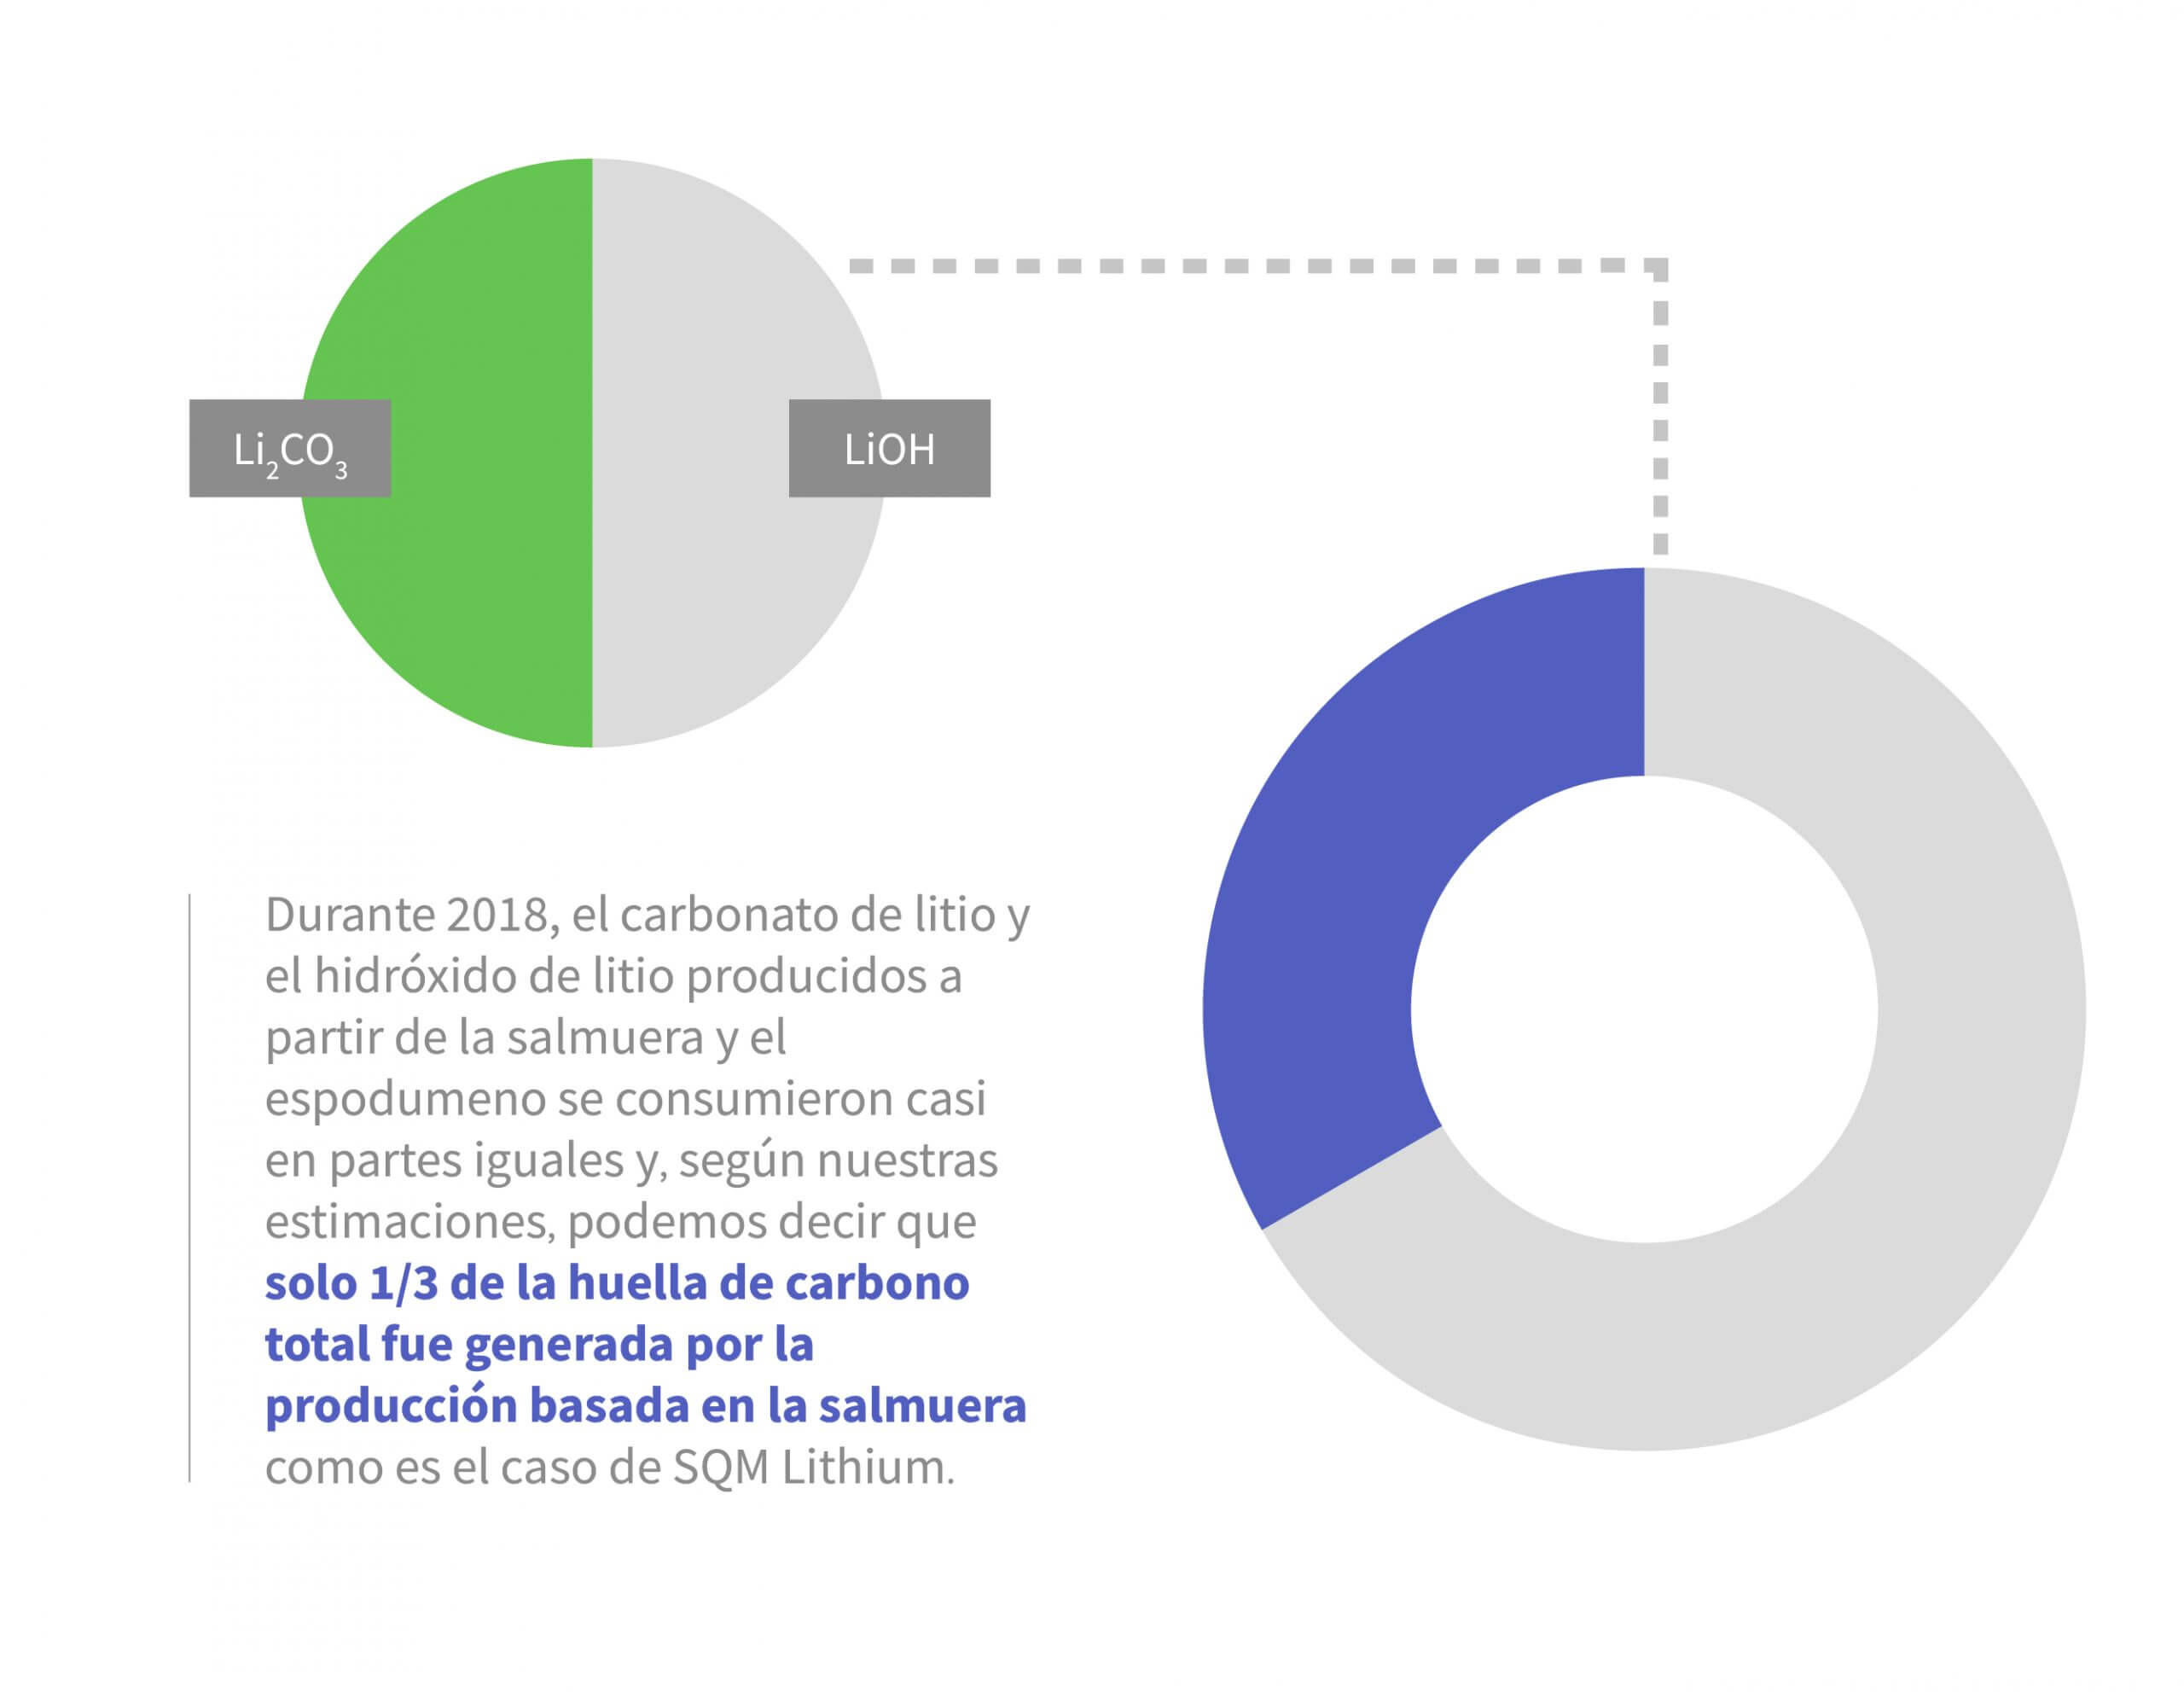 You can see in the image a graph of the life cycle of lithium and the savings in the production of its carbon footprint